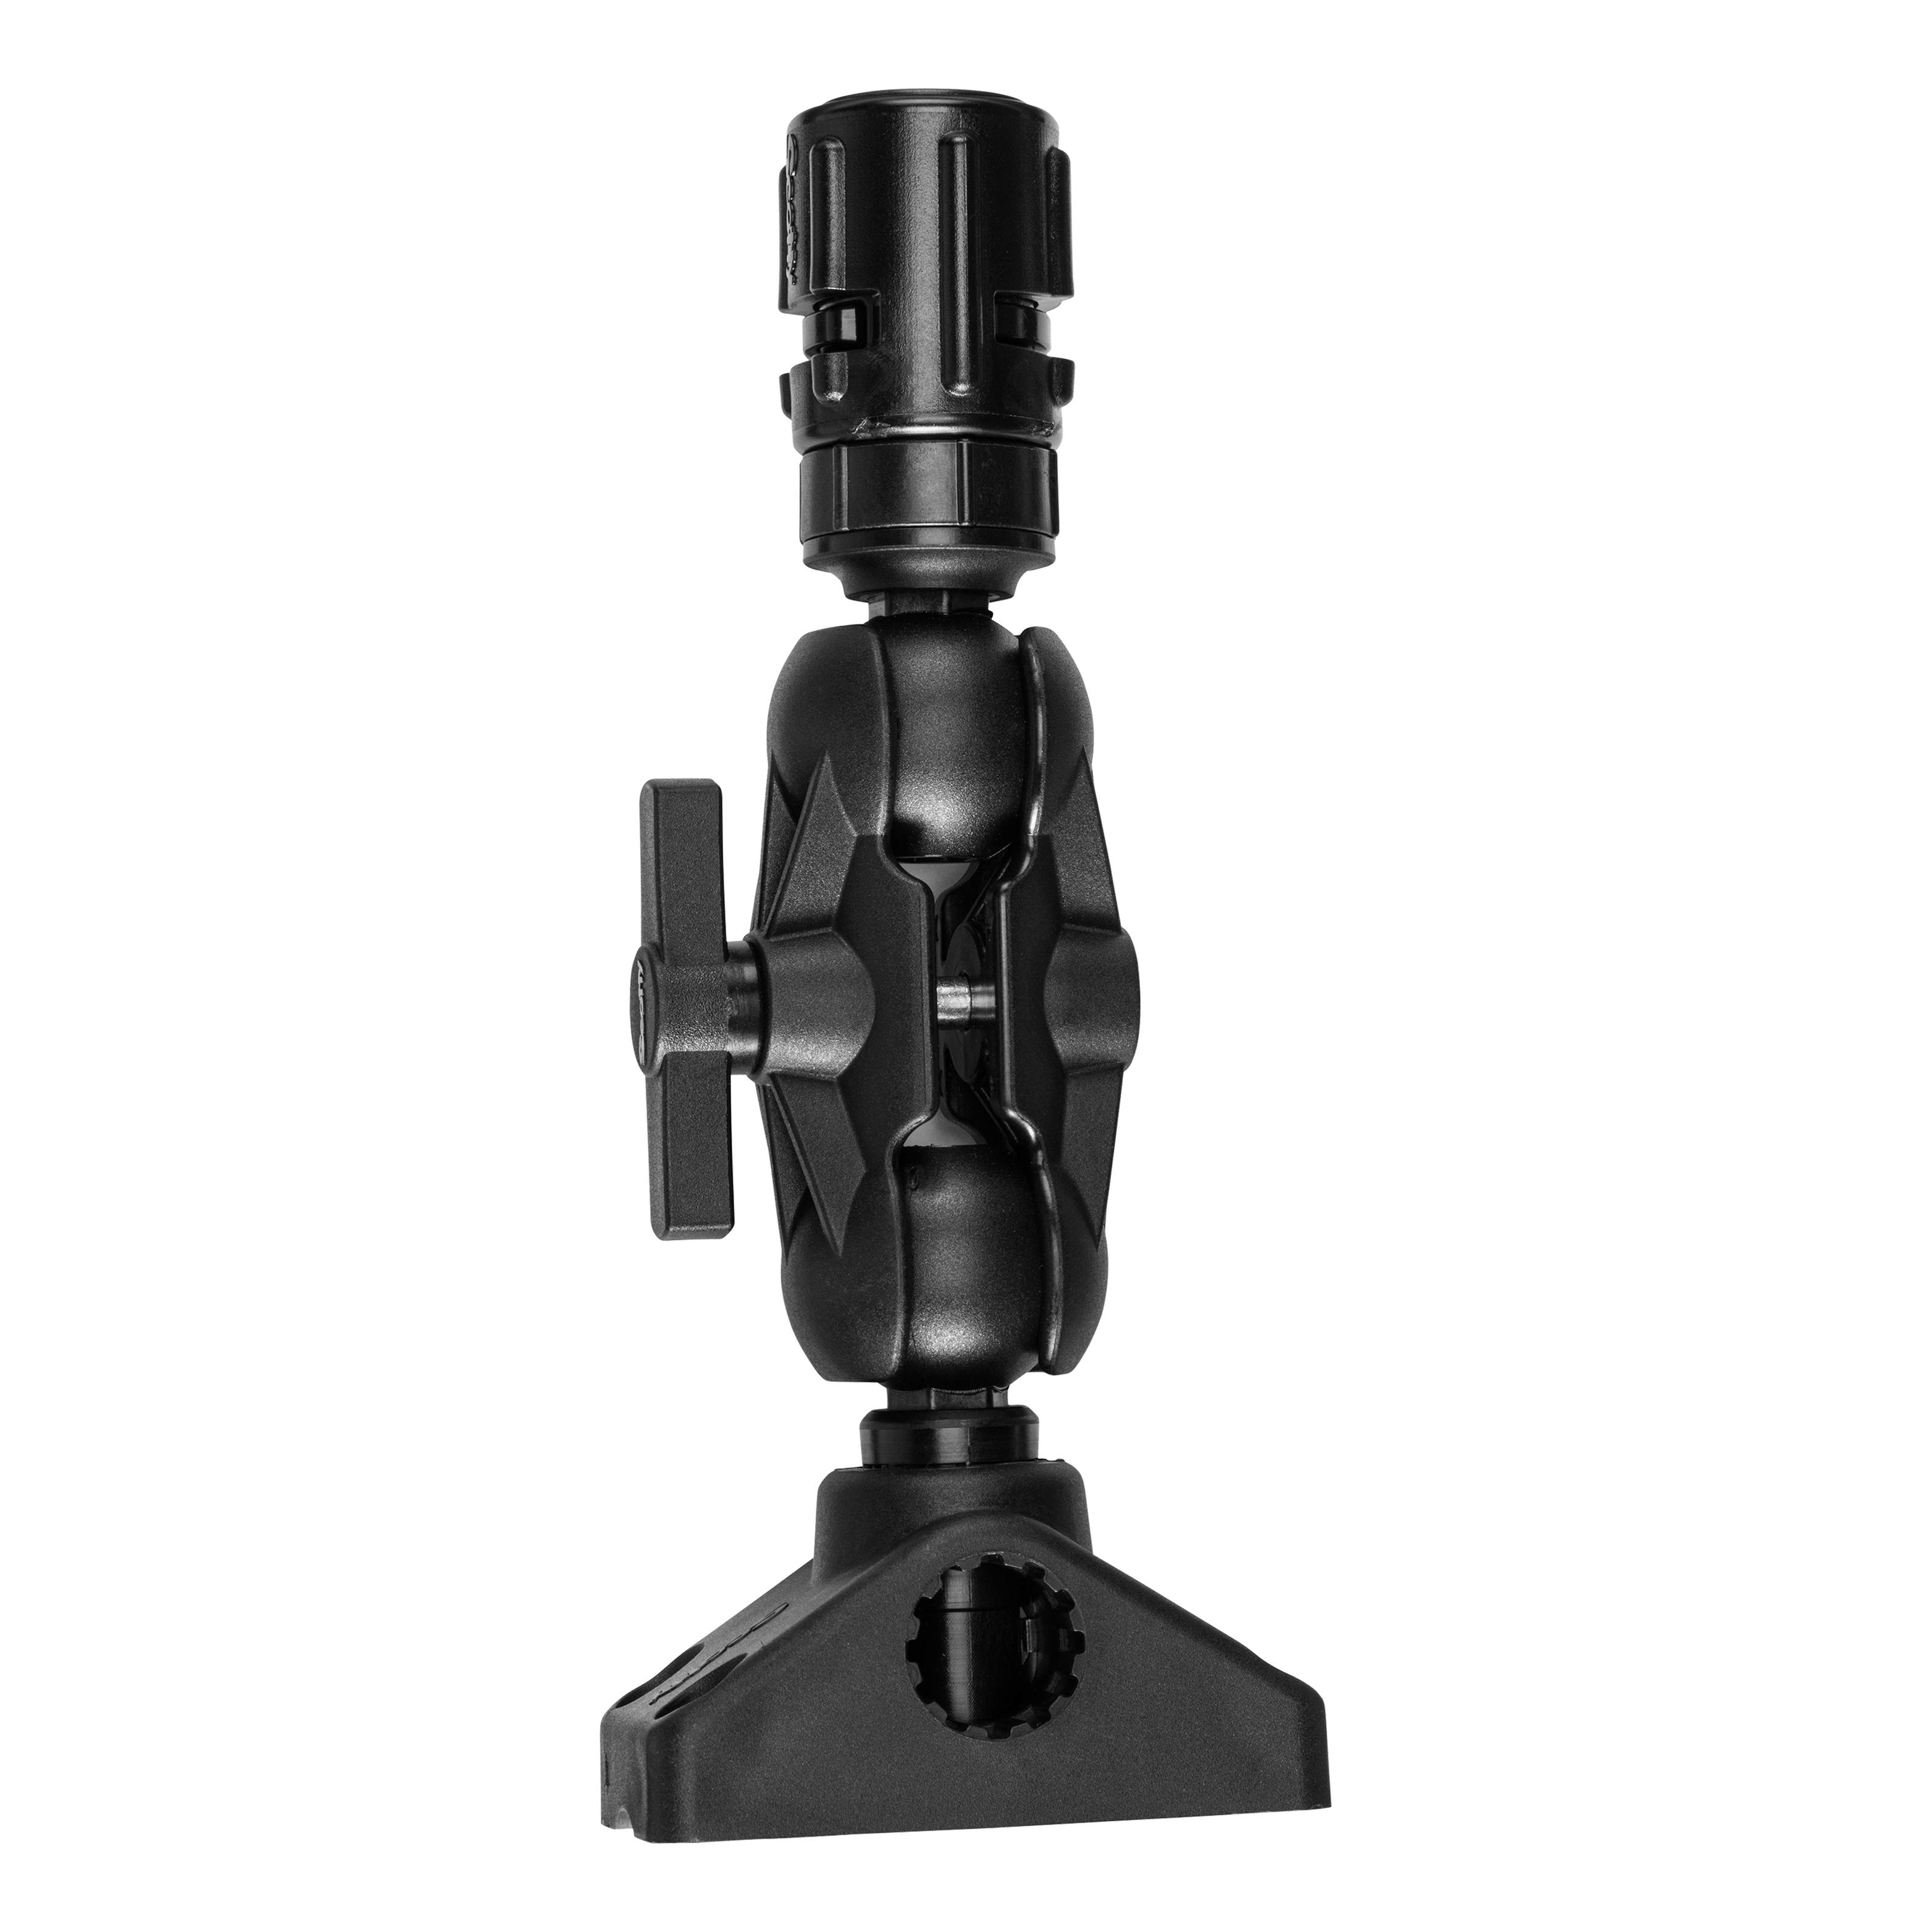 Scotty® 1.5 Ball Mount with Gear Head Post and Side Deck Mount